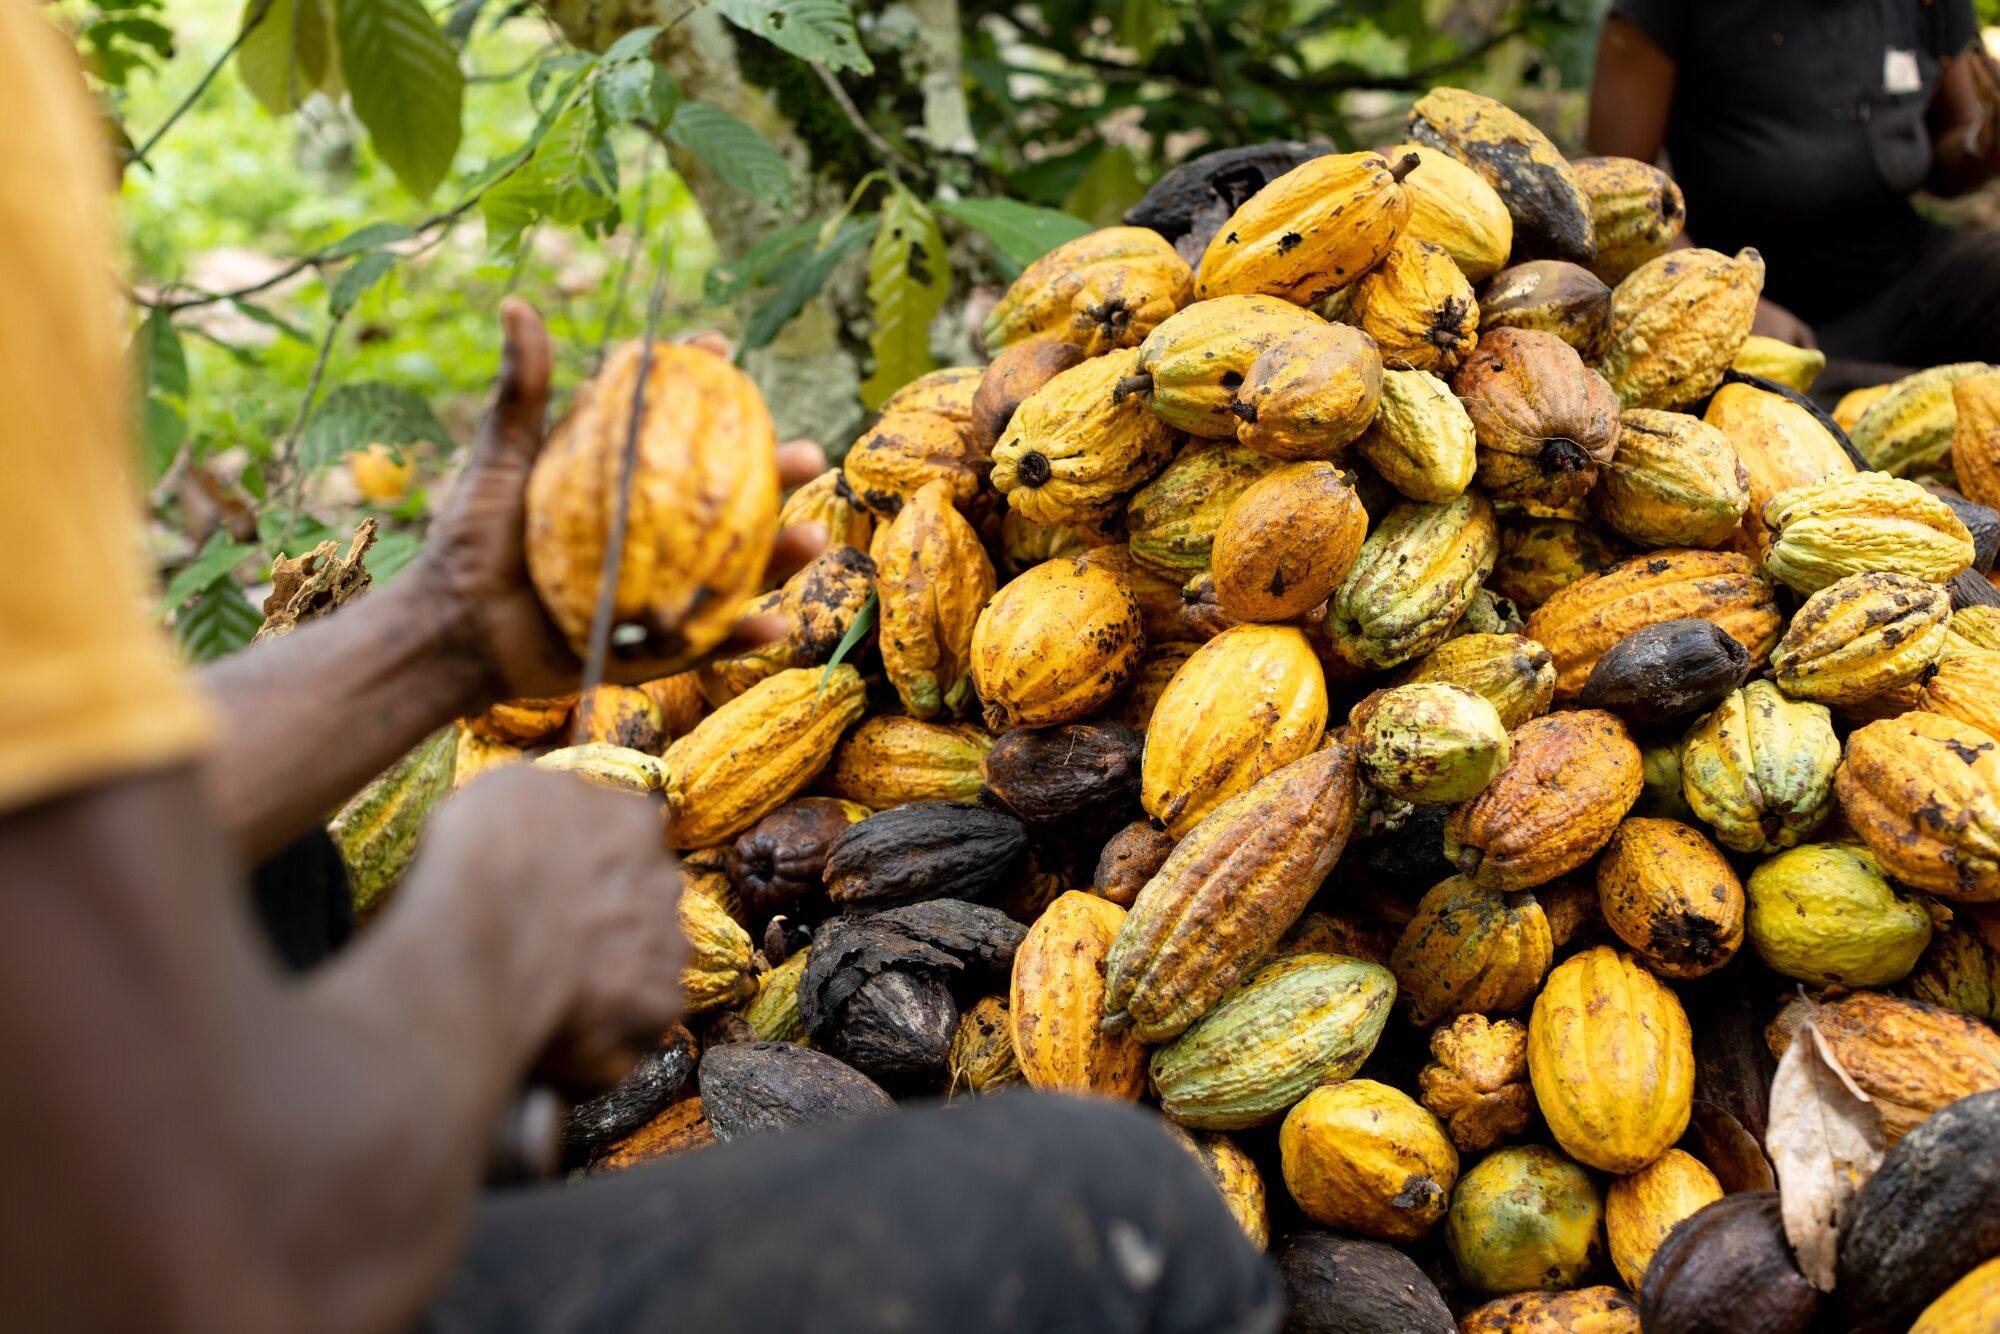 A pile of cocoa pods, showing signs of black pod disease, during a harvest at a farm in the town of Kwabeng, Ghana, on October 22 last year. Photo: Bloomberg